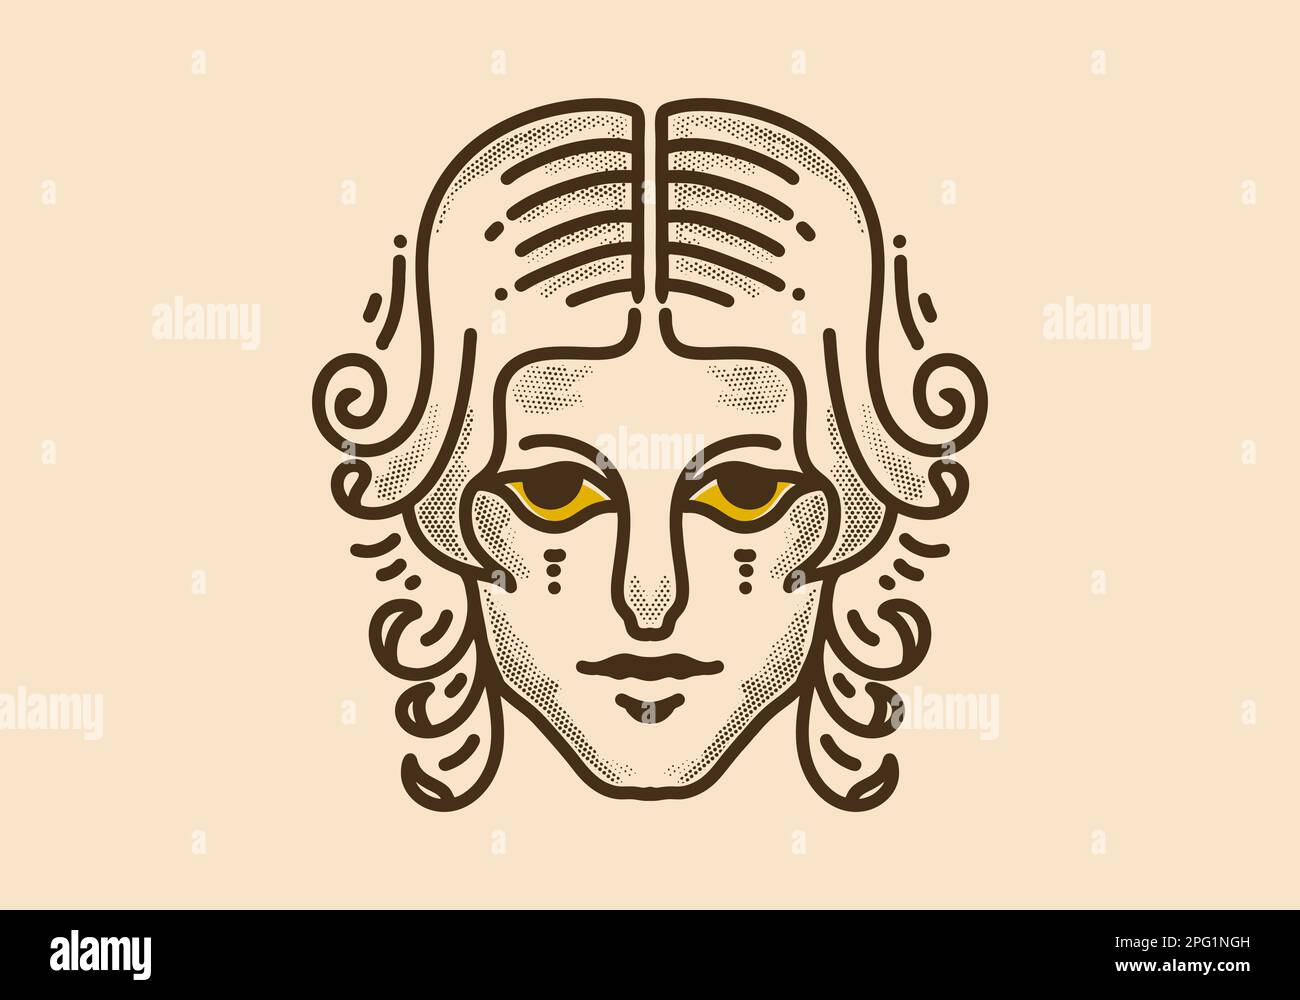 Vintage art illustration design of man head with curly hair Stock Vector